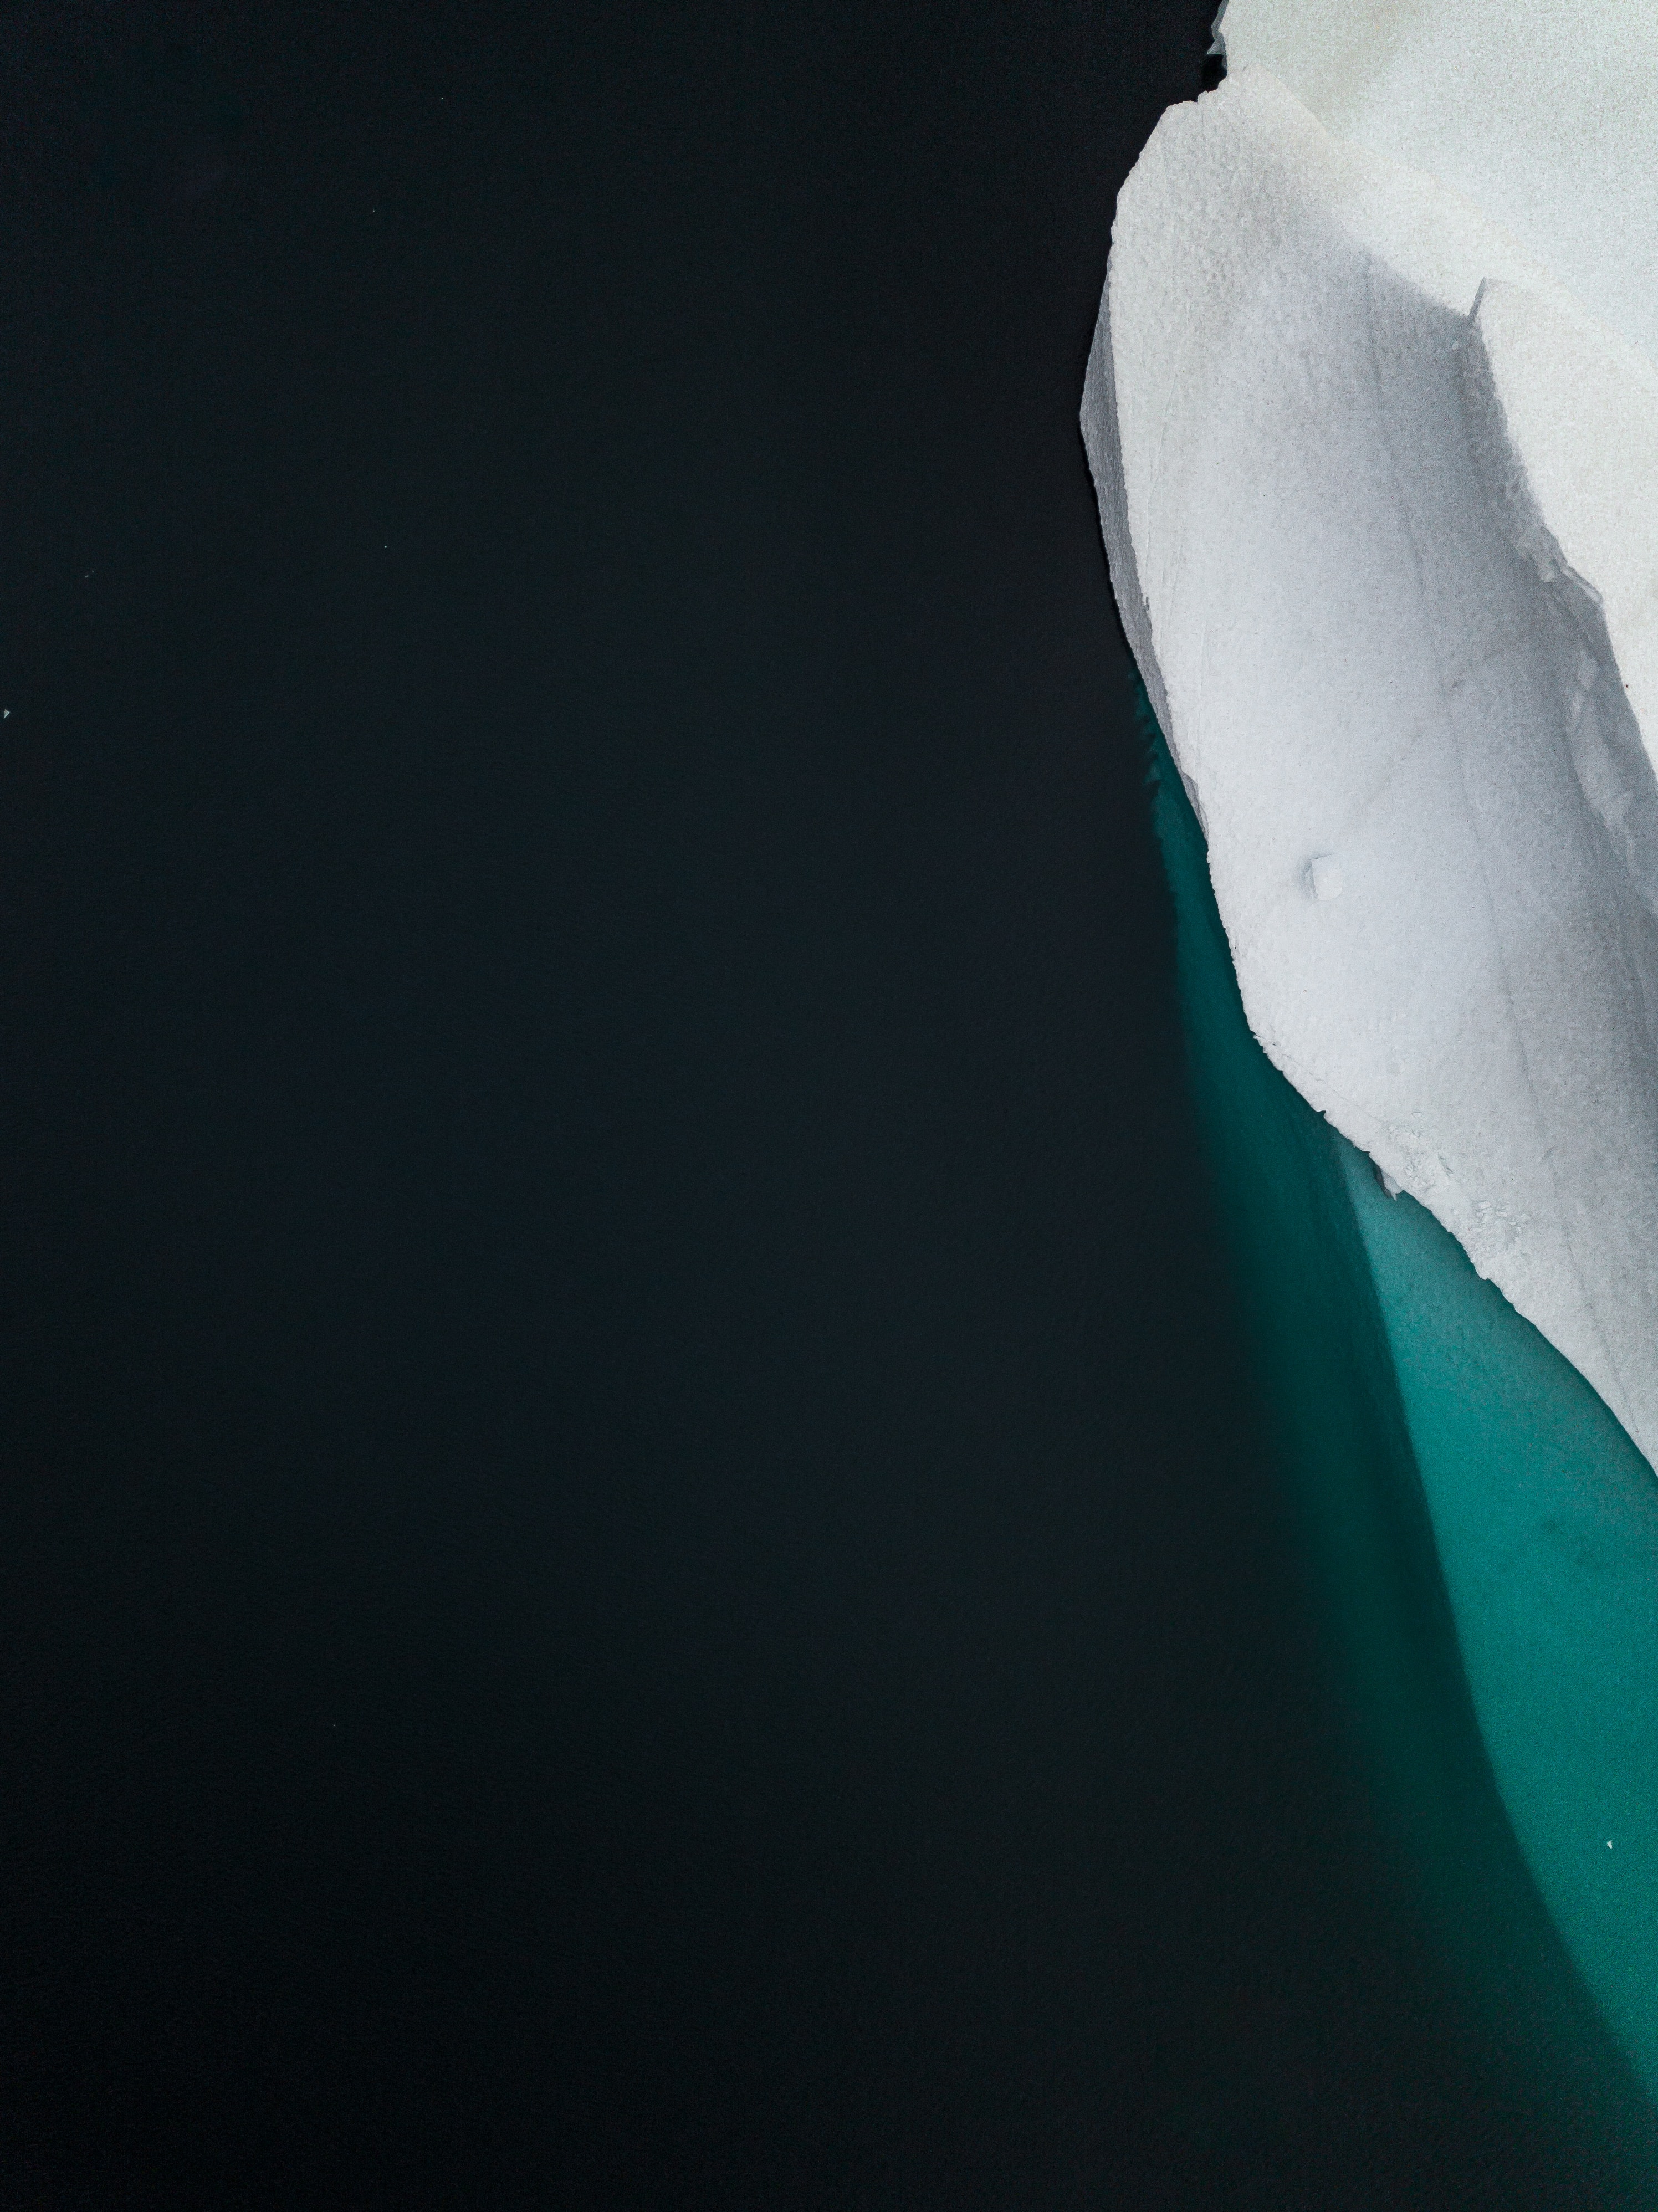 Widescreen image iceberg, minimalism, view from above, water